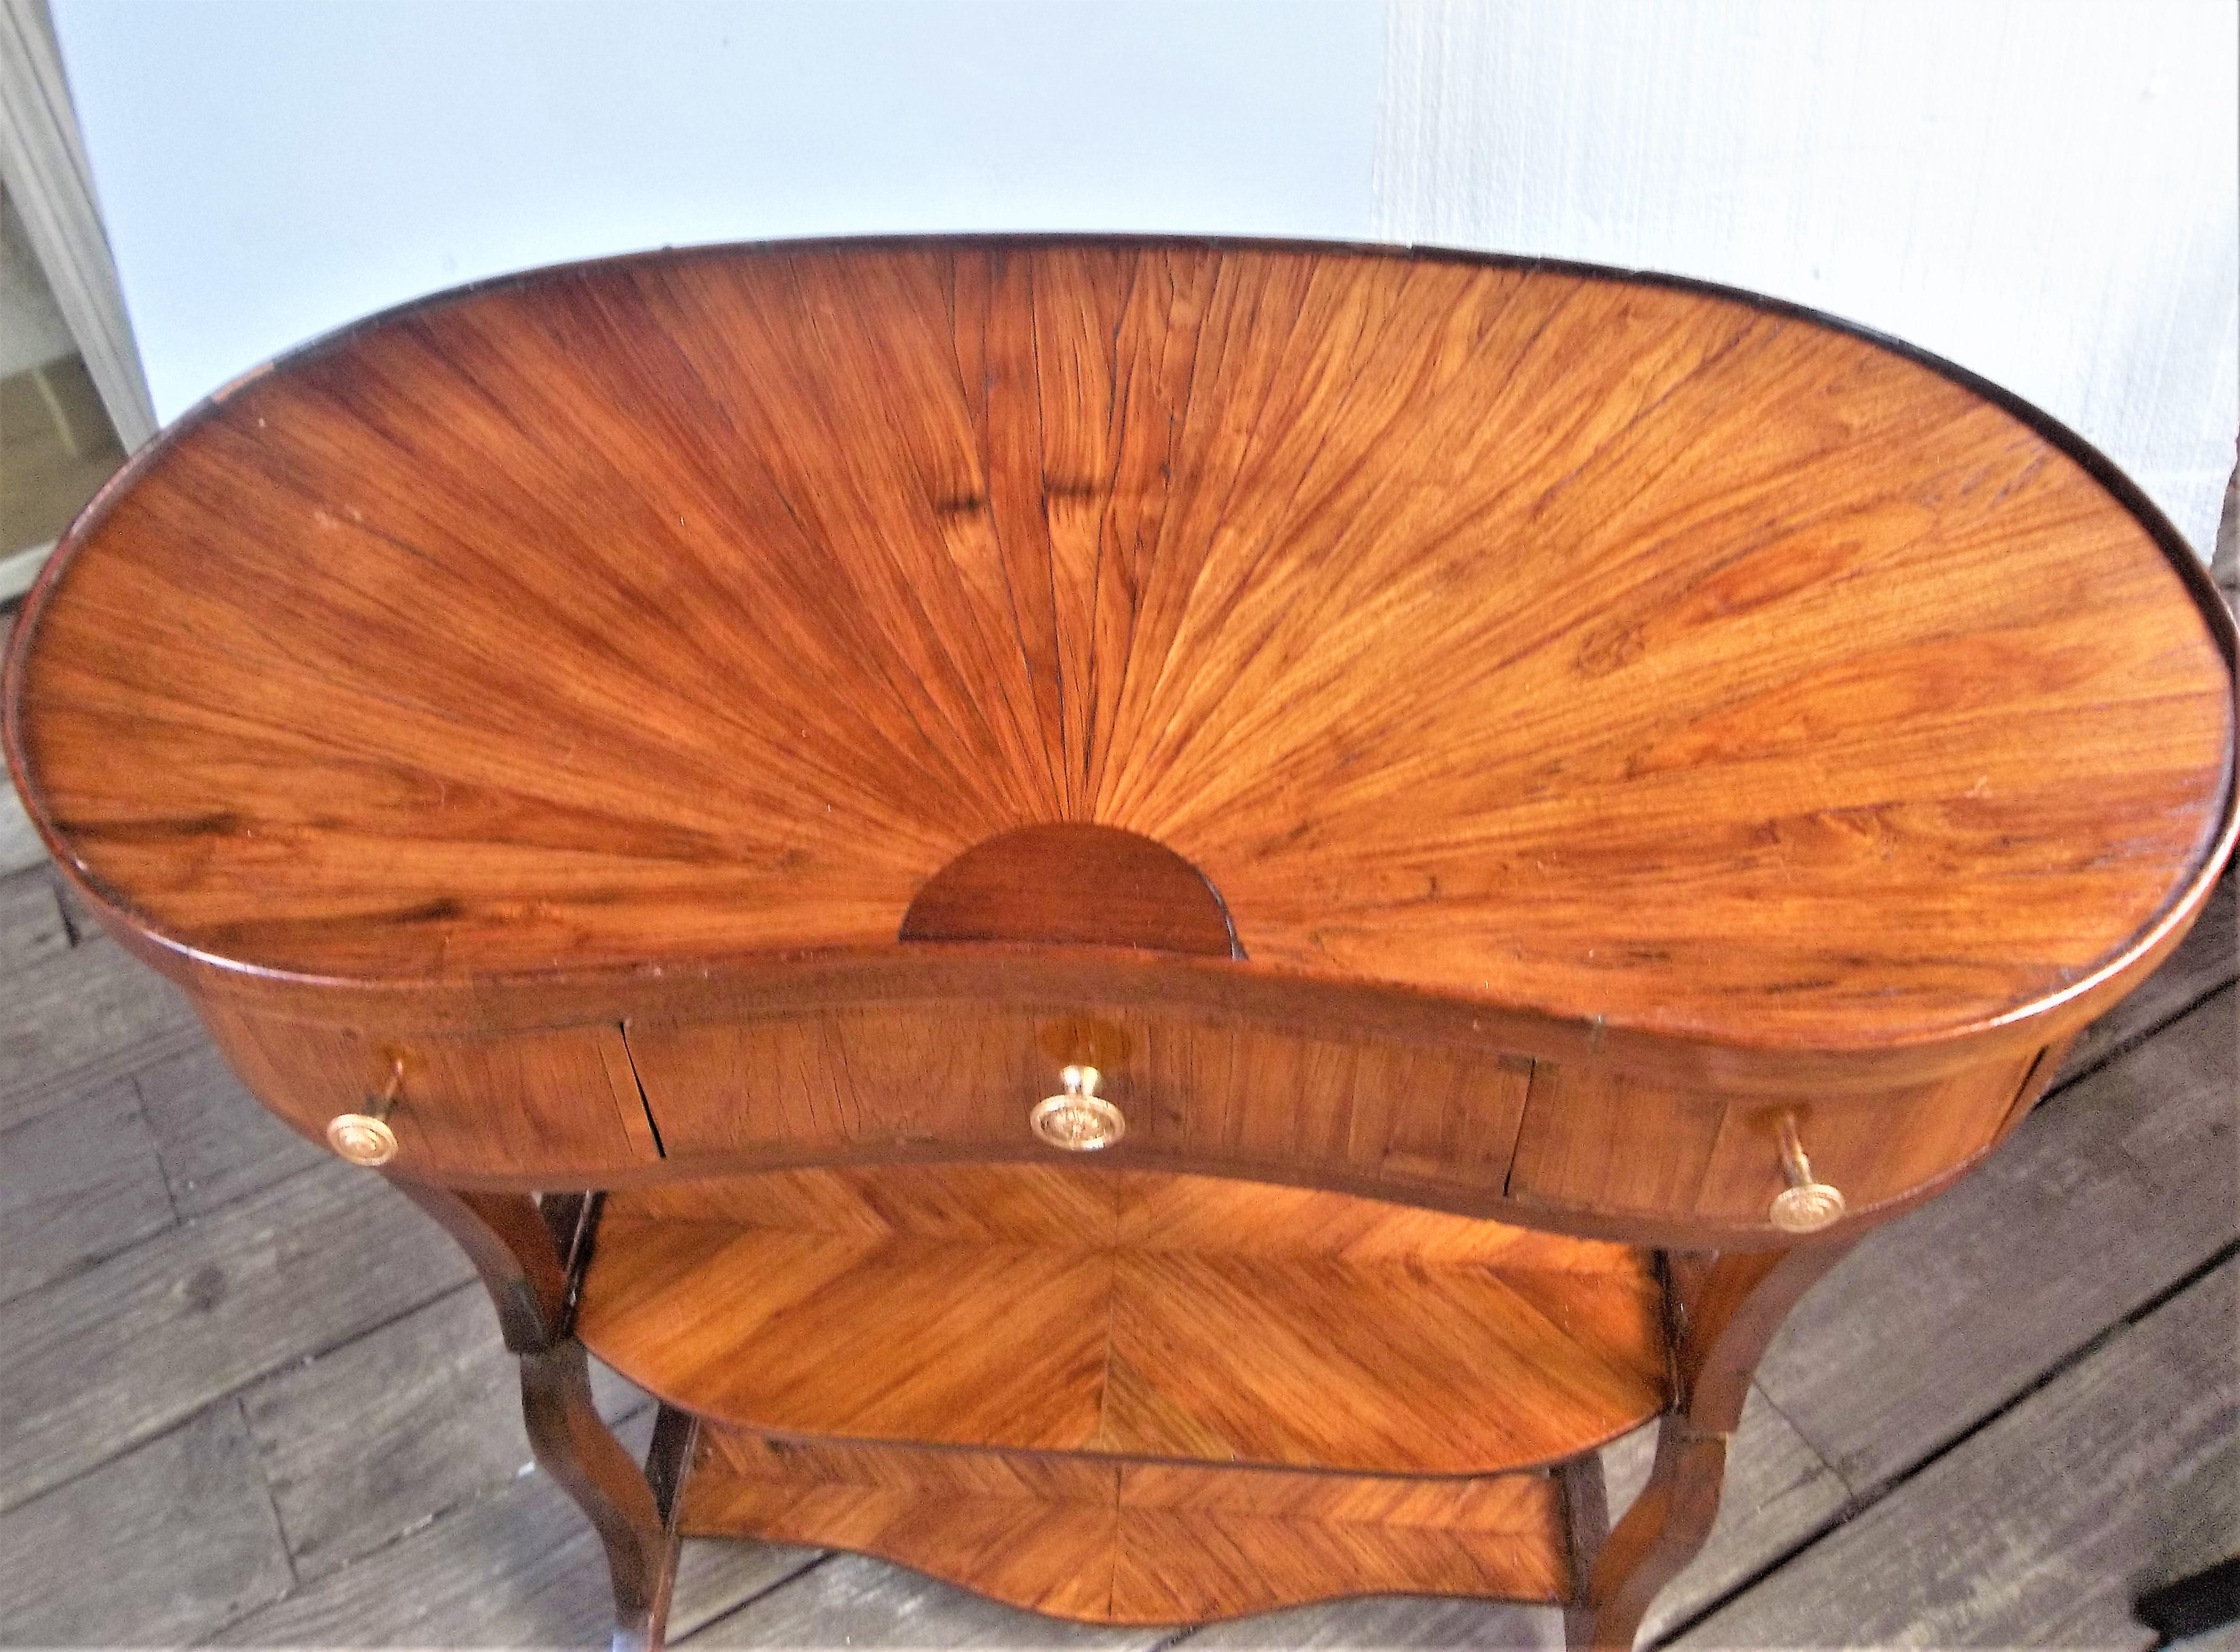 Louis Xvi Style Tulipwood Three-Tiered Desk or Dressing Table with Sunburst Top 1